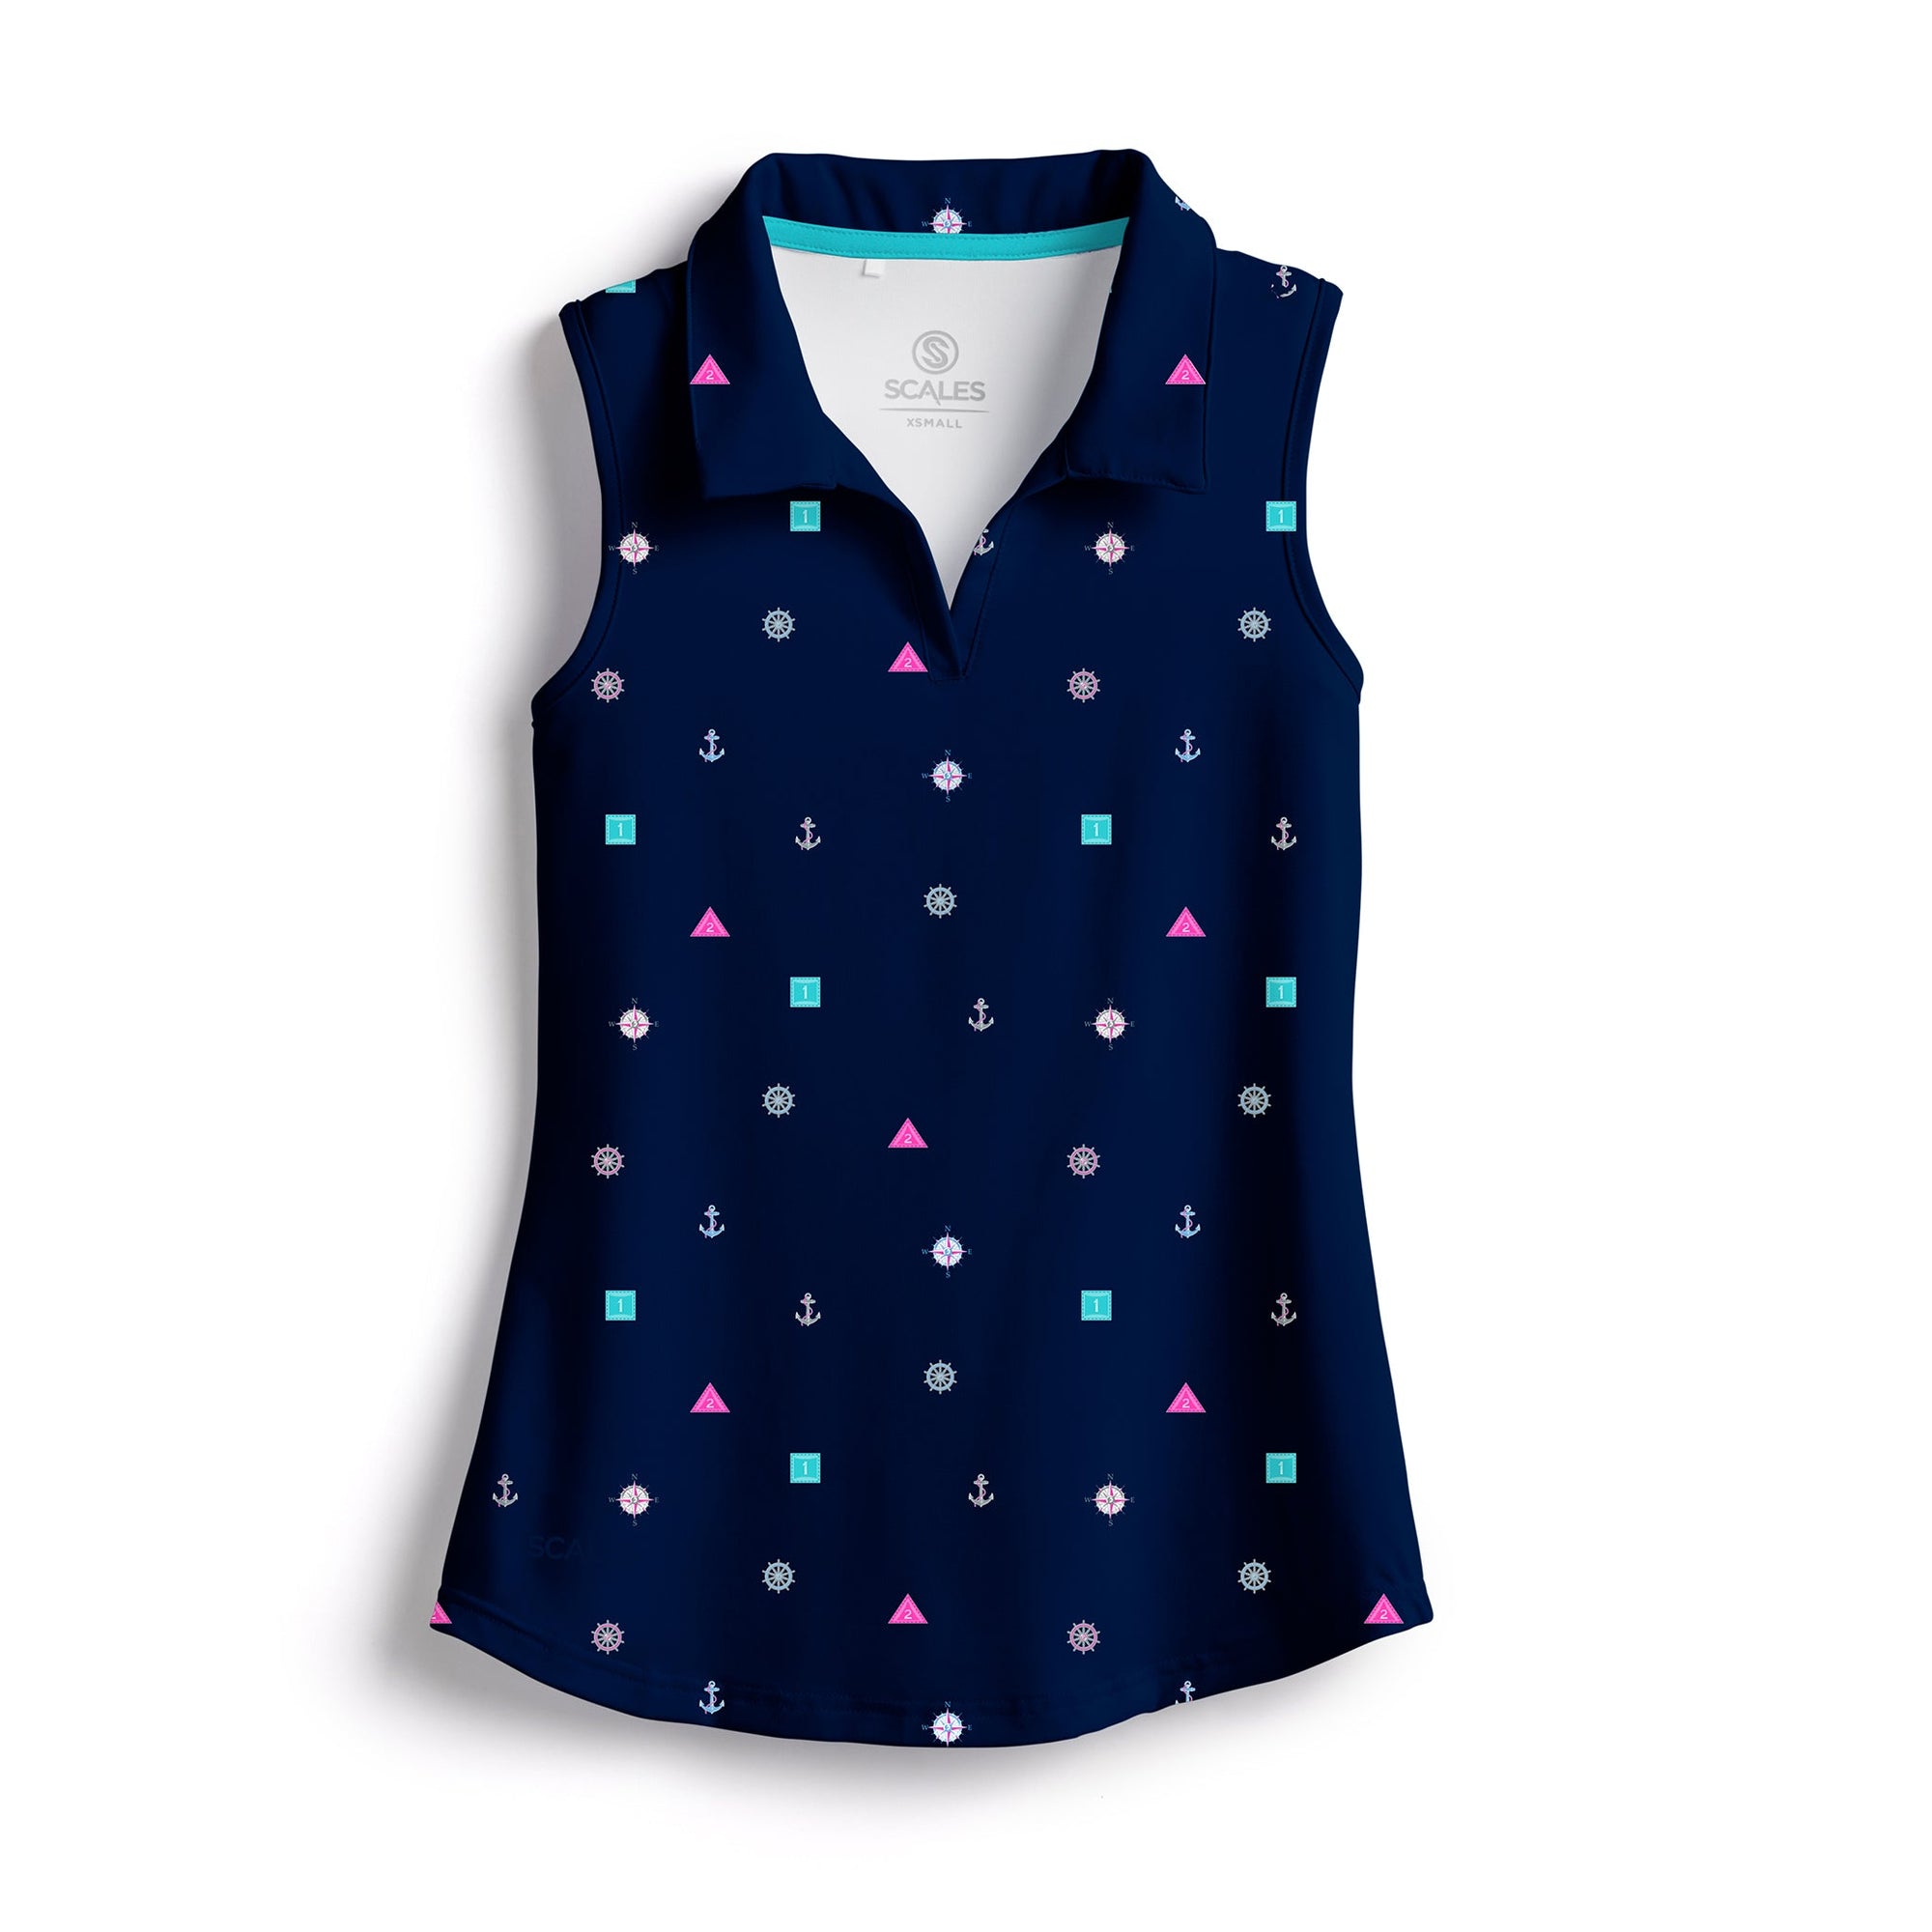 SCALES Qualified Womens Sleeveless Polo